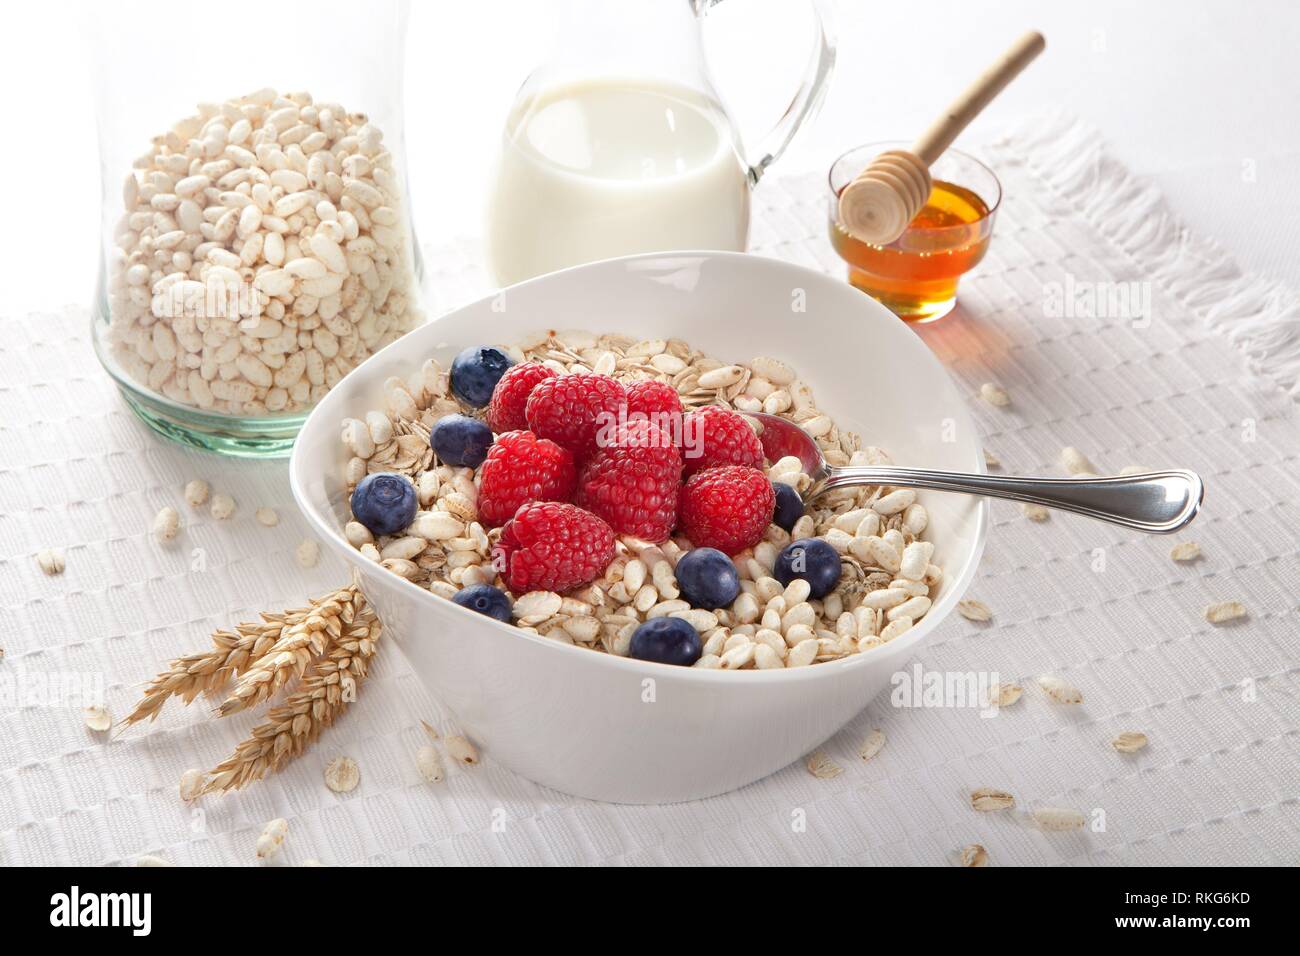 breakfast with milk, oats, puffed rice and red berries. Stock Photo